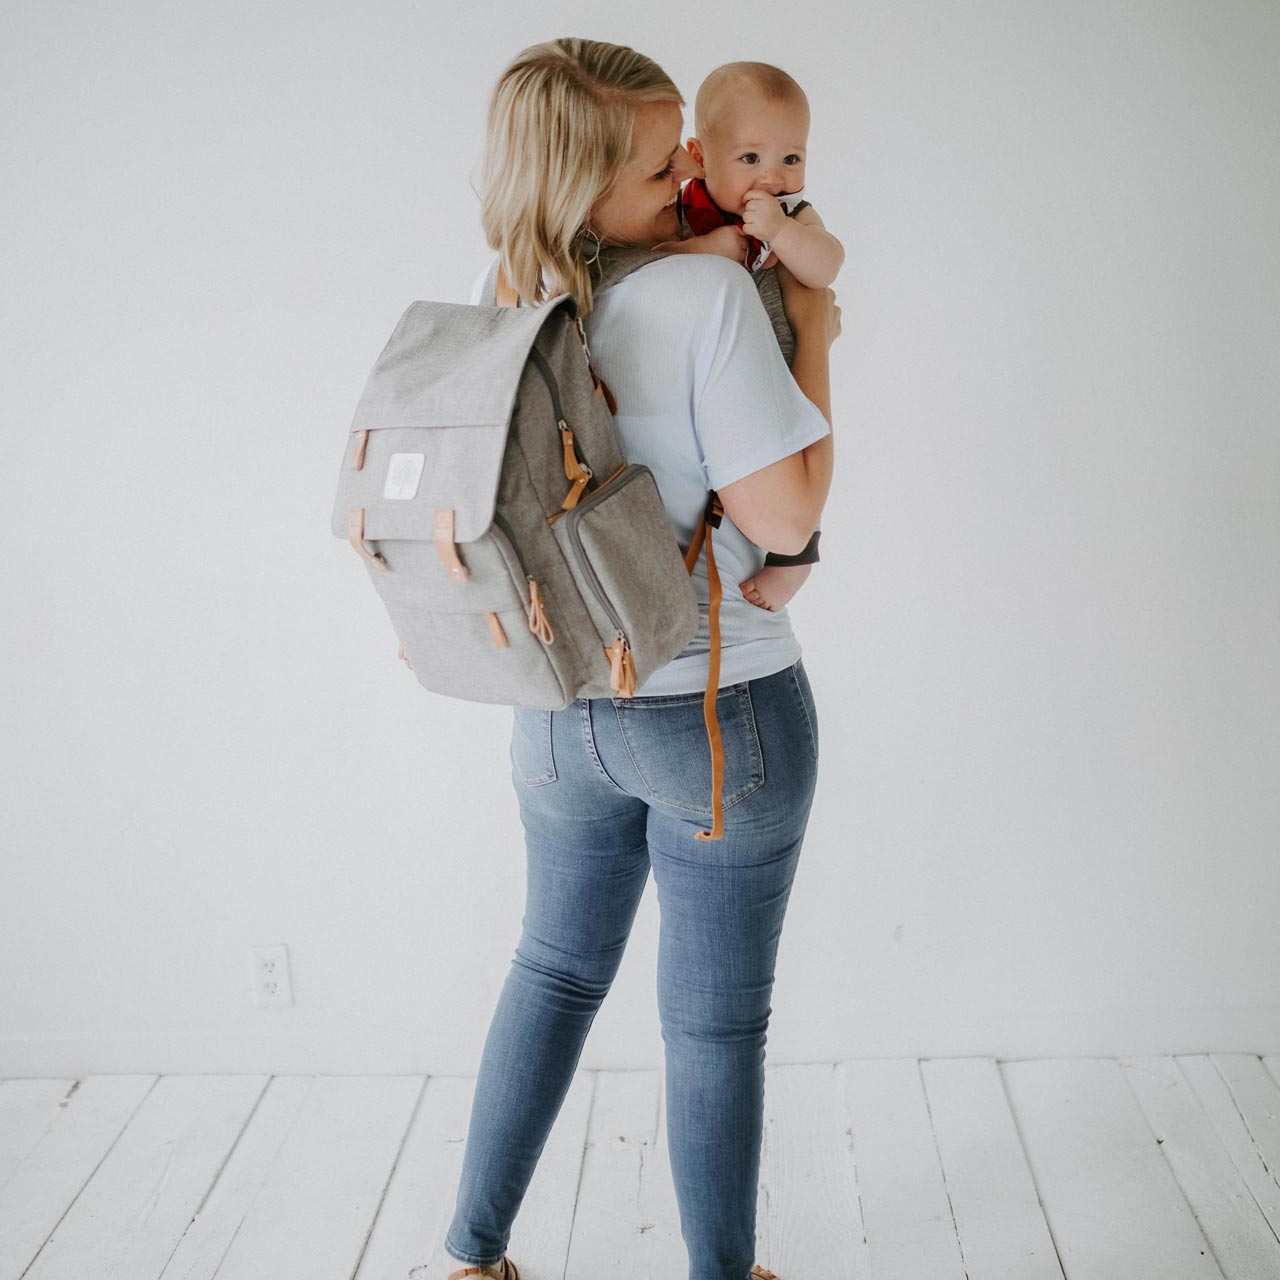 Parker Baby Co. Large Diaper Backpack Birch Bag - Cream